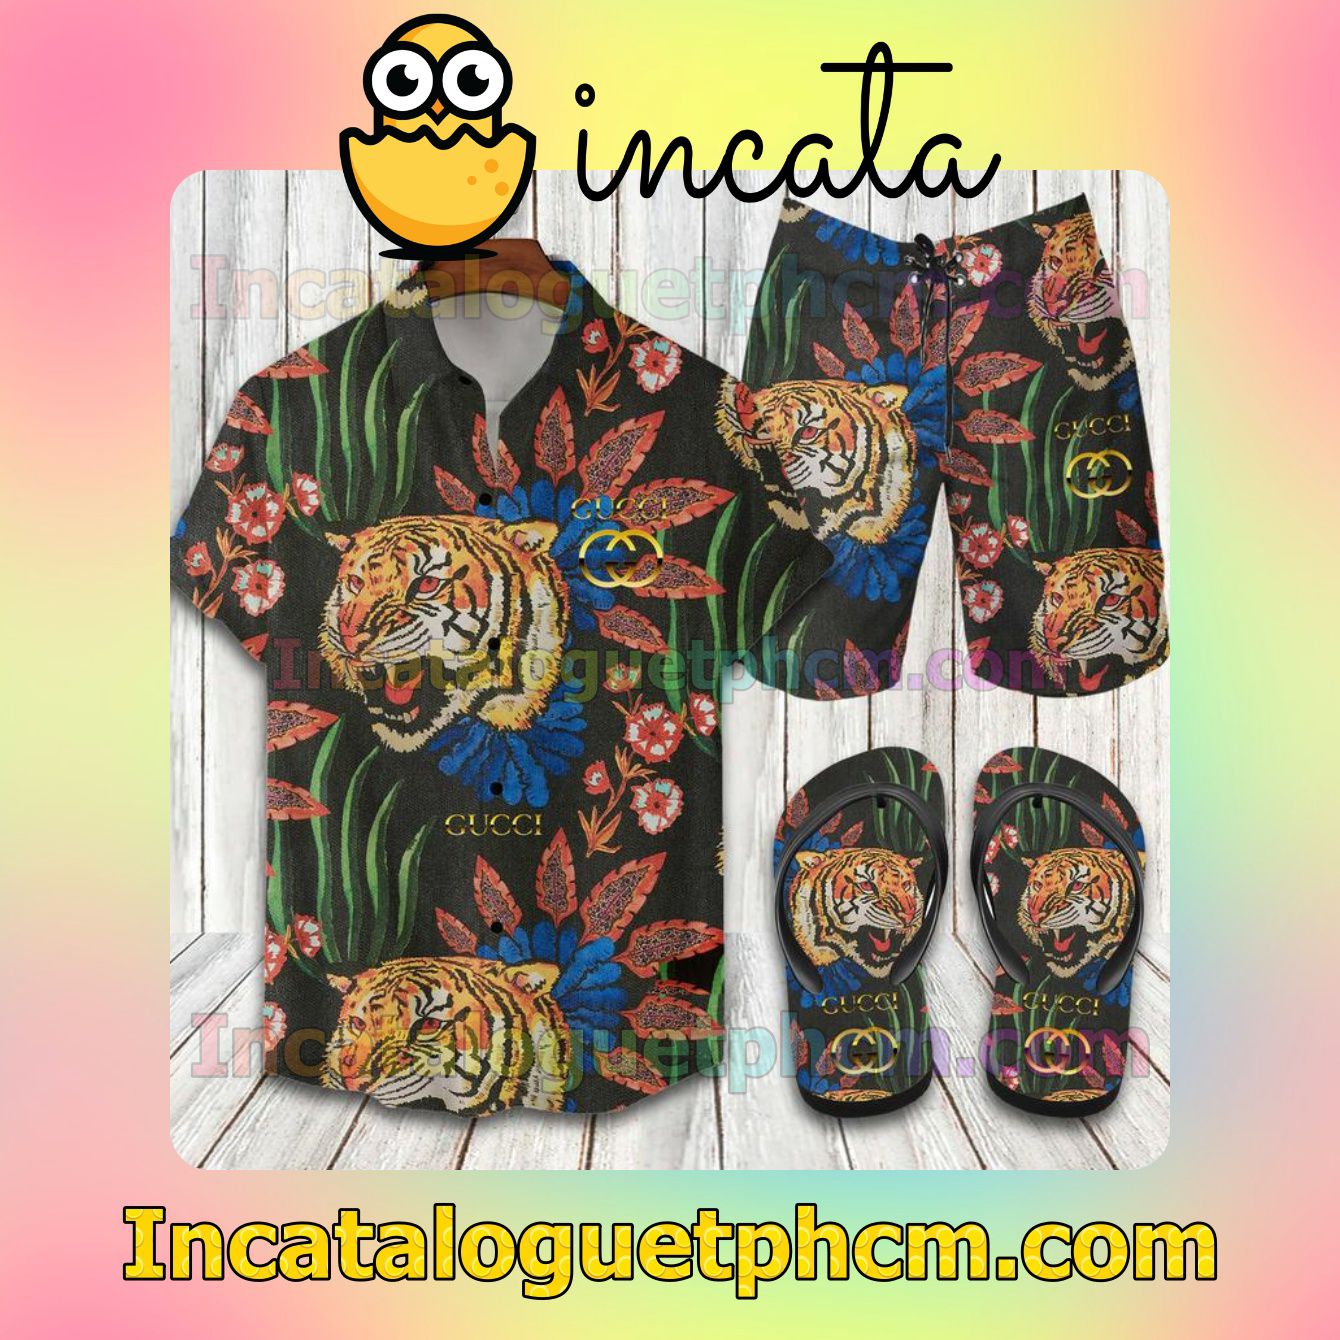 Gucci Tiger Both Flowers And Leaves Aloha Shirt And Shorts